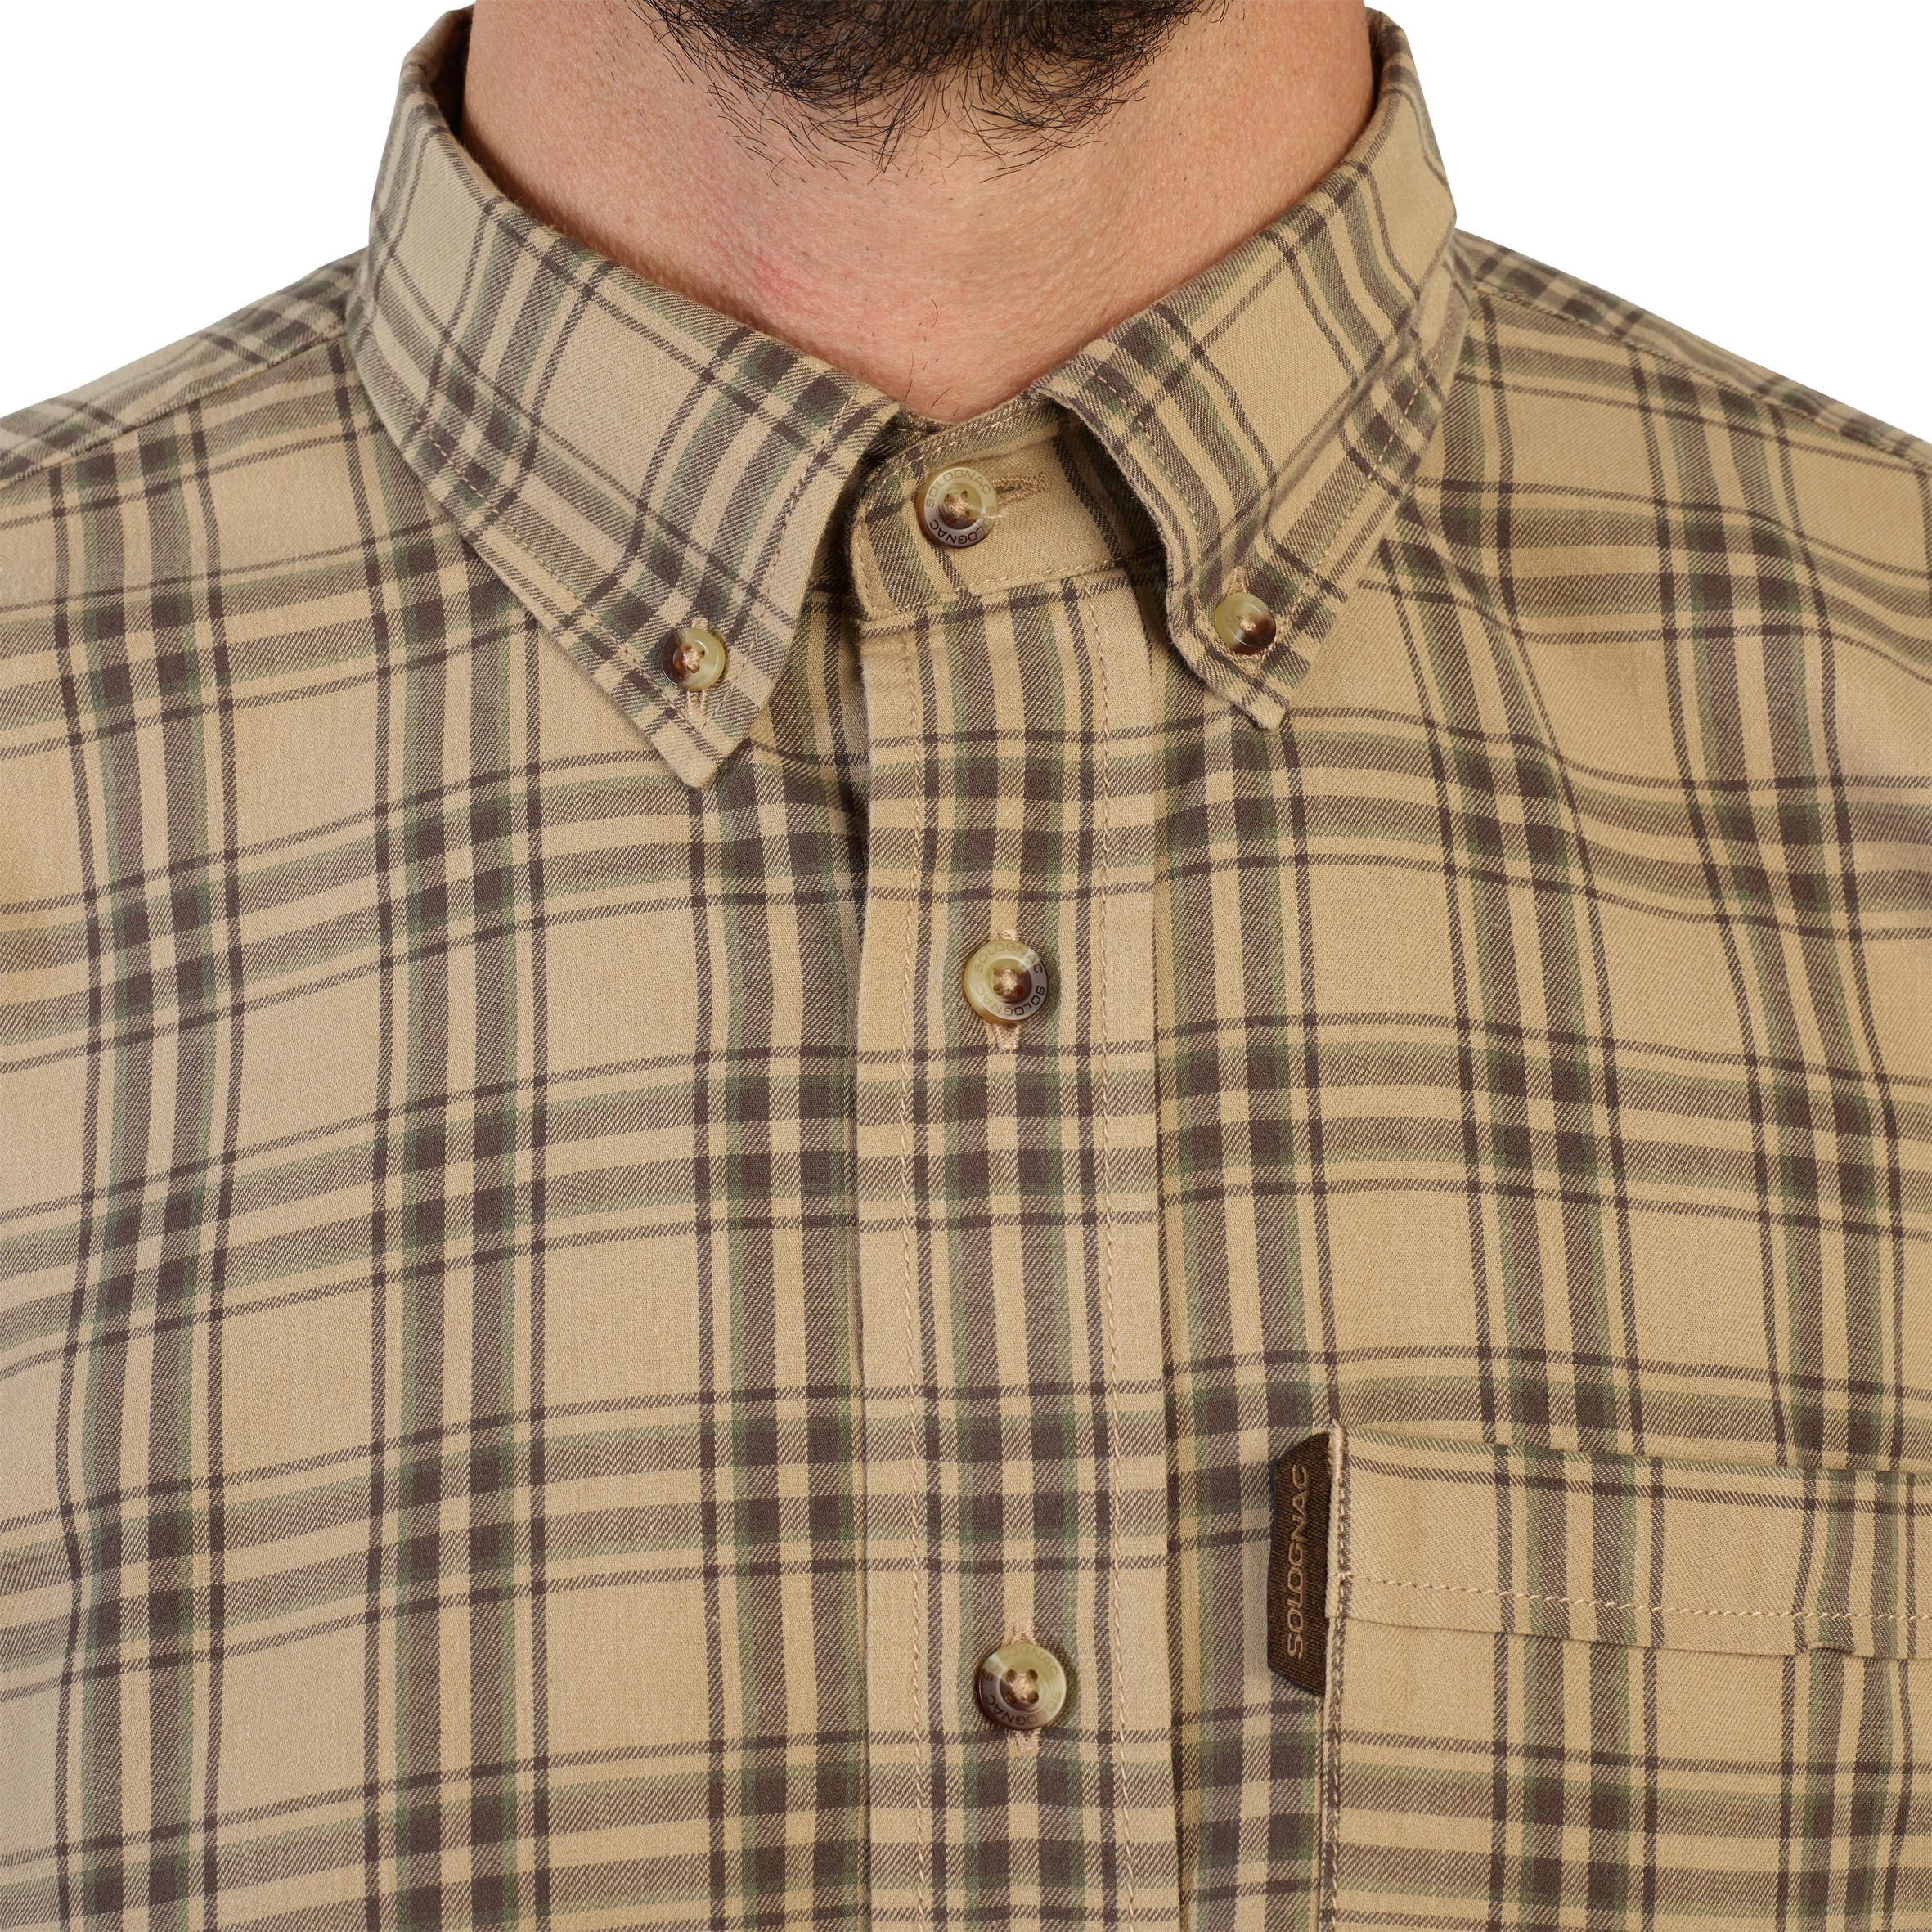 Men's Hunting Long-sleeved Breathable Cotton Shirt - 100 checkered beige. 2/3